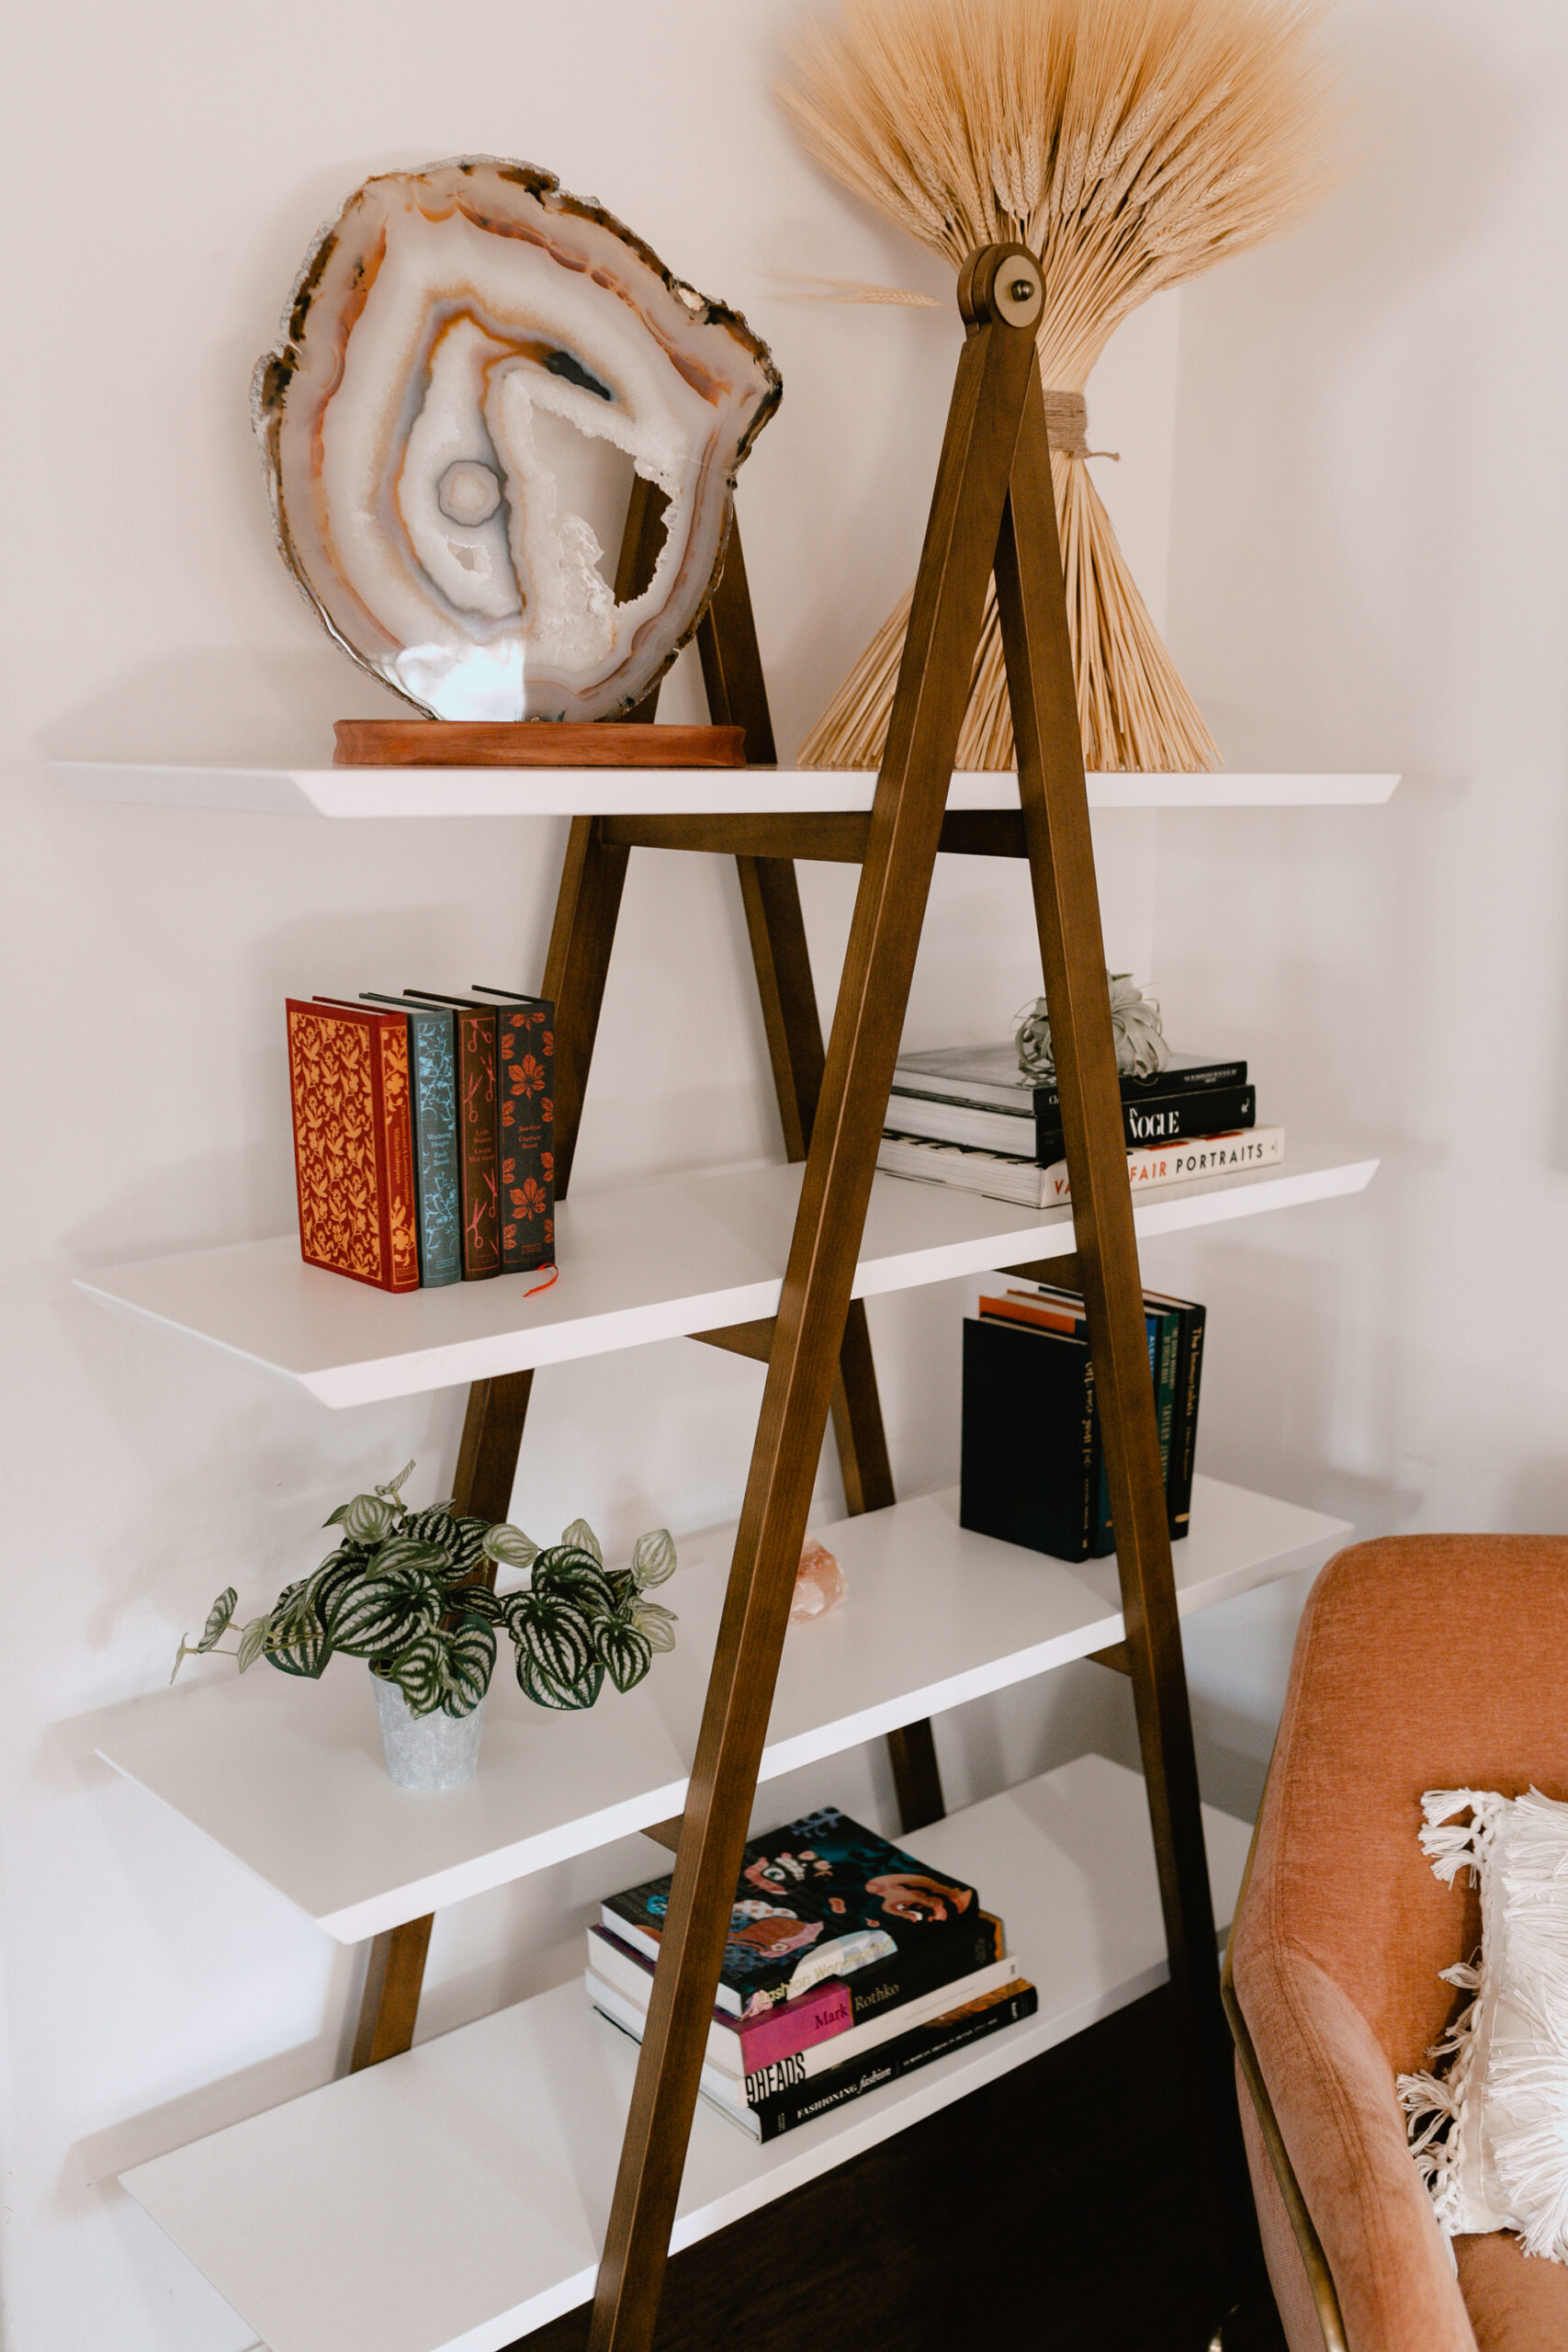 loving how this simple shelf adds so much dimension and style to this awkward corner of our home! #theldlhome #ourarticle #interiordesign #shelfie #interiorstyling